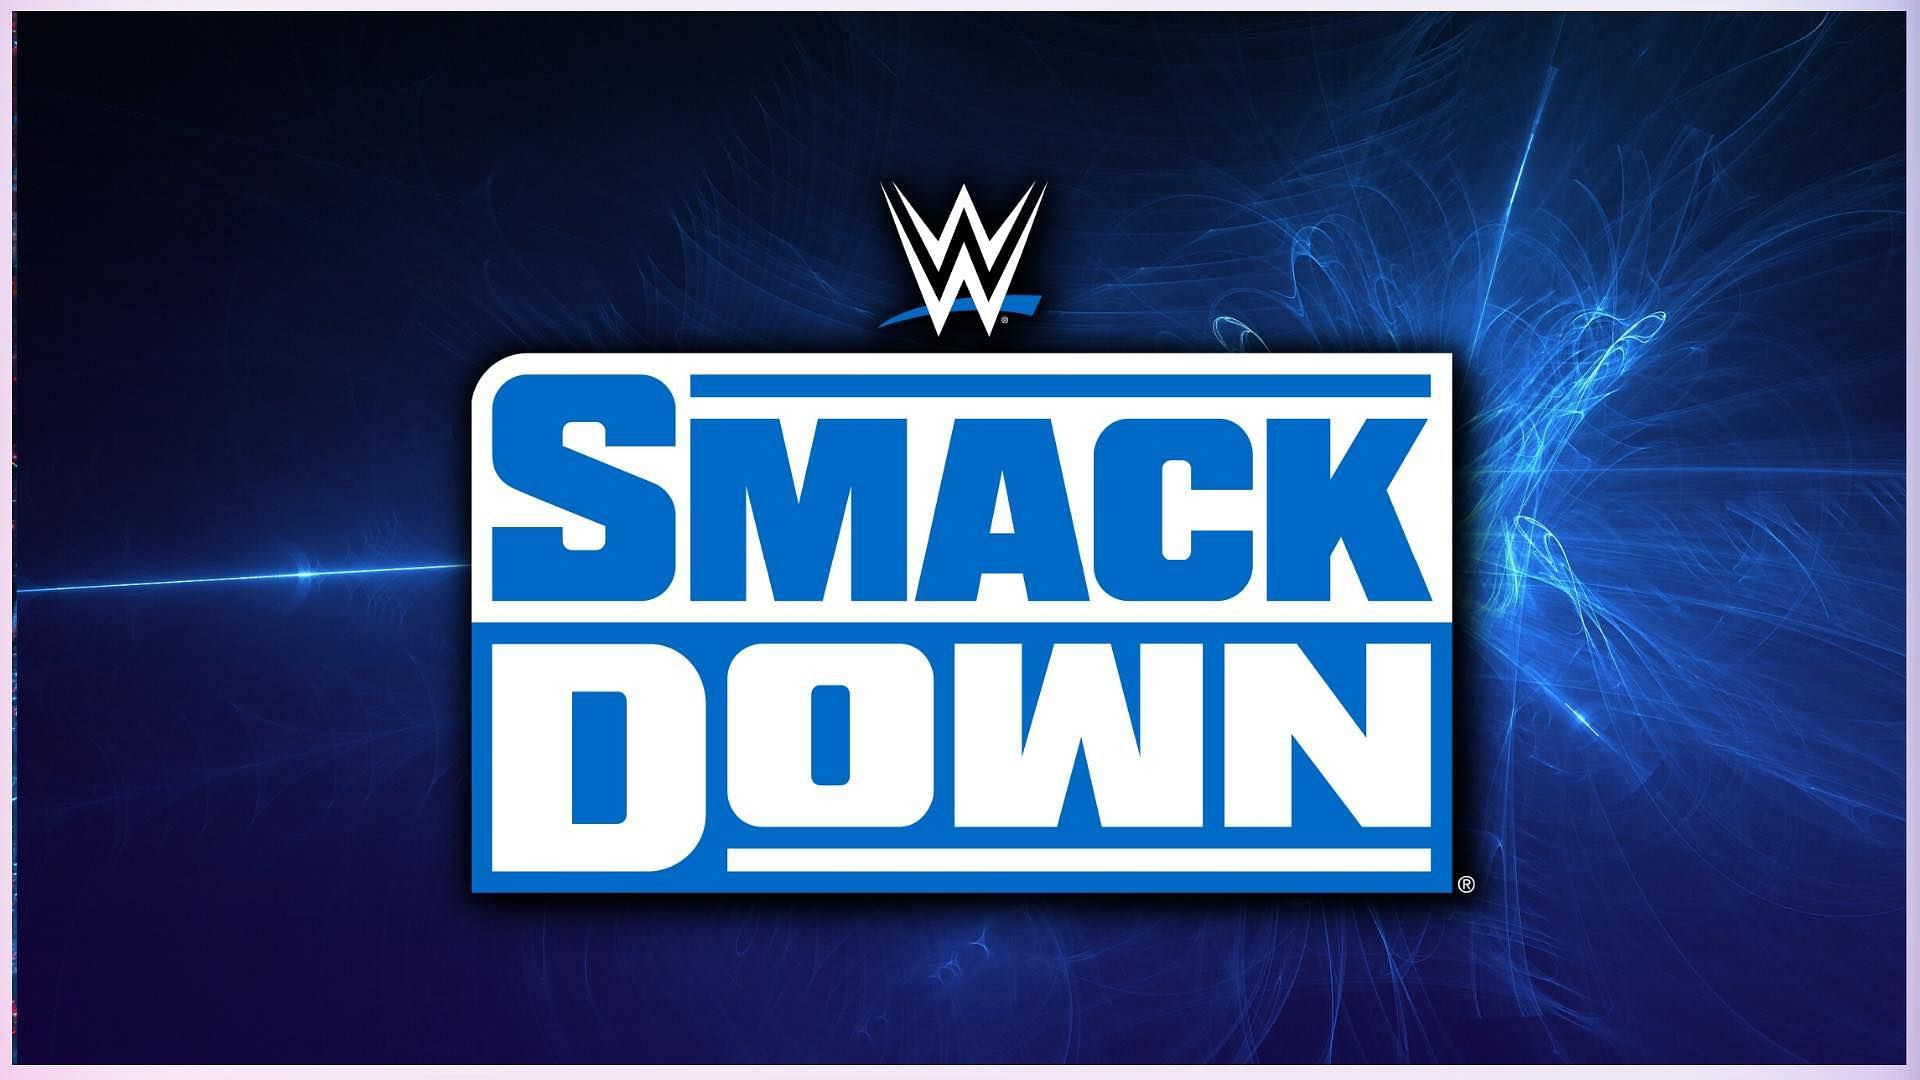 WWE SmackDown this week was live from Fiserv Forum in Milwaukee, Wisconsin